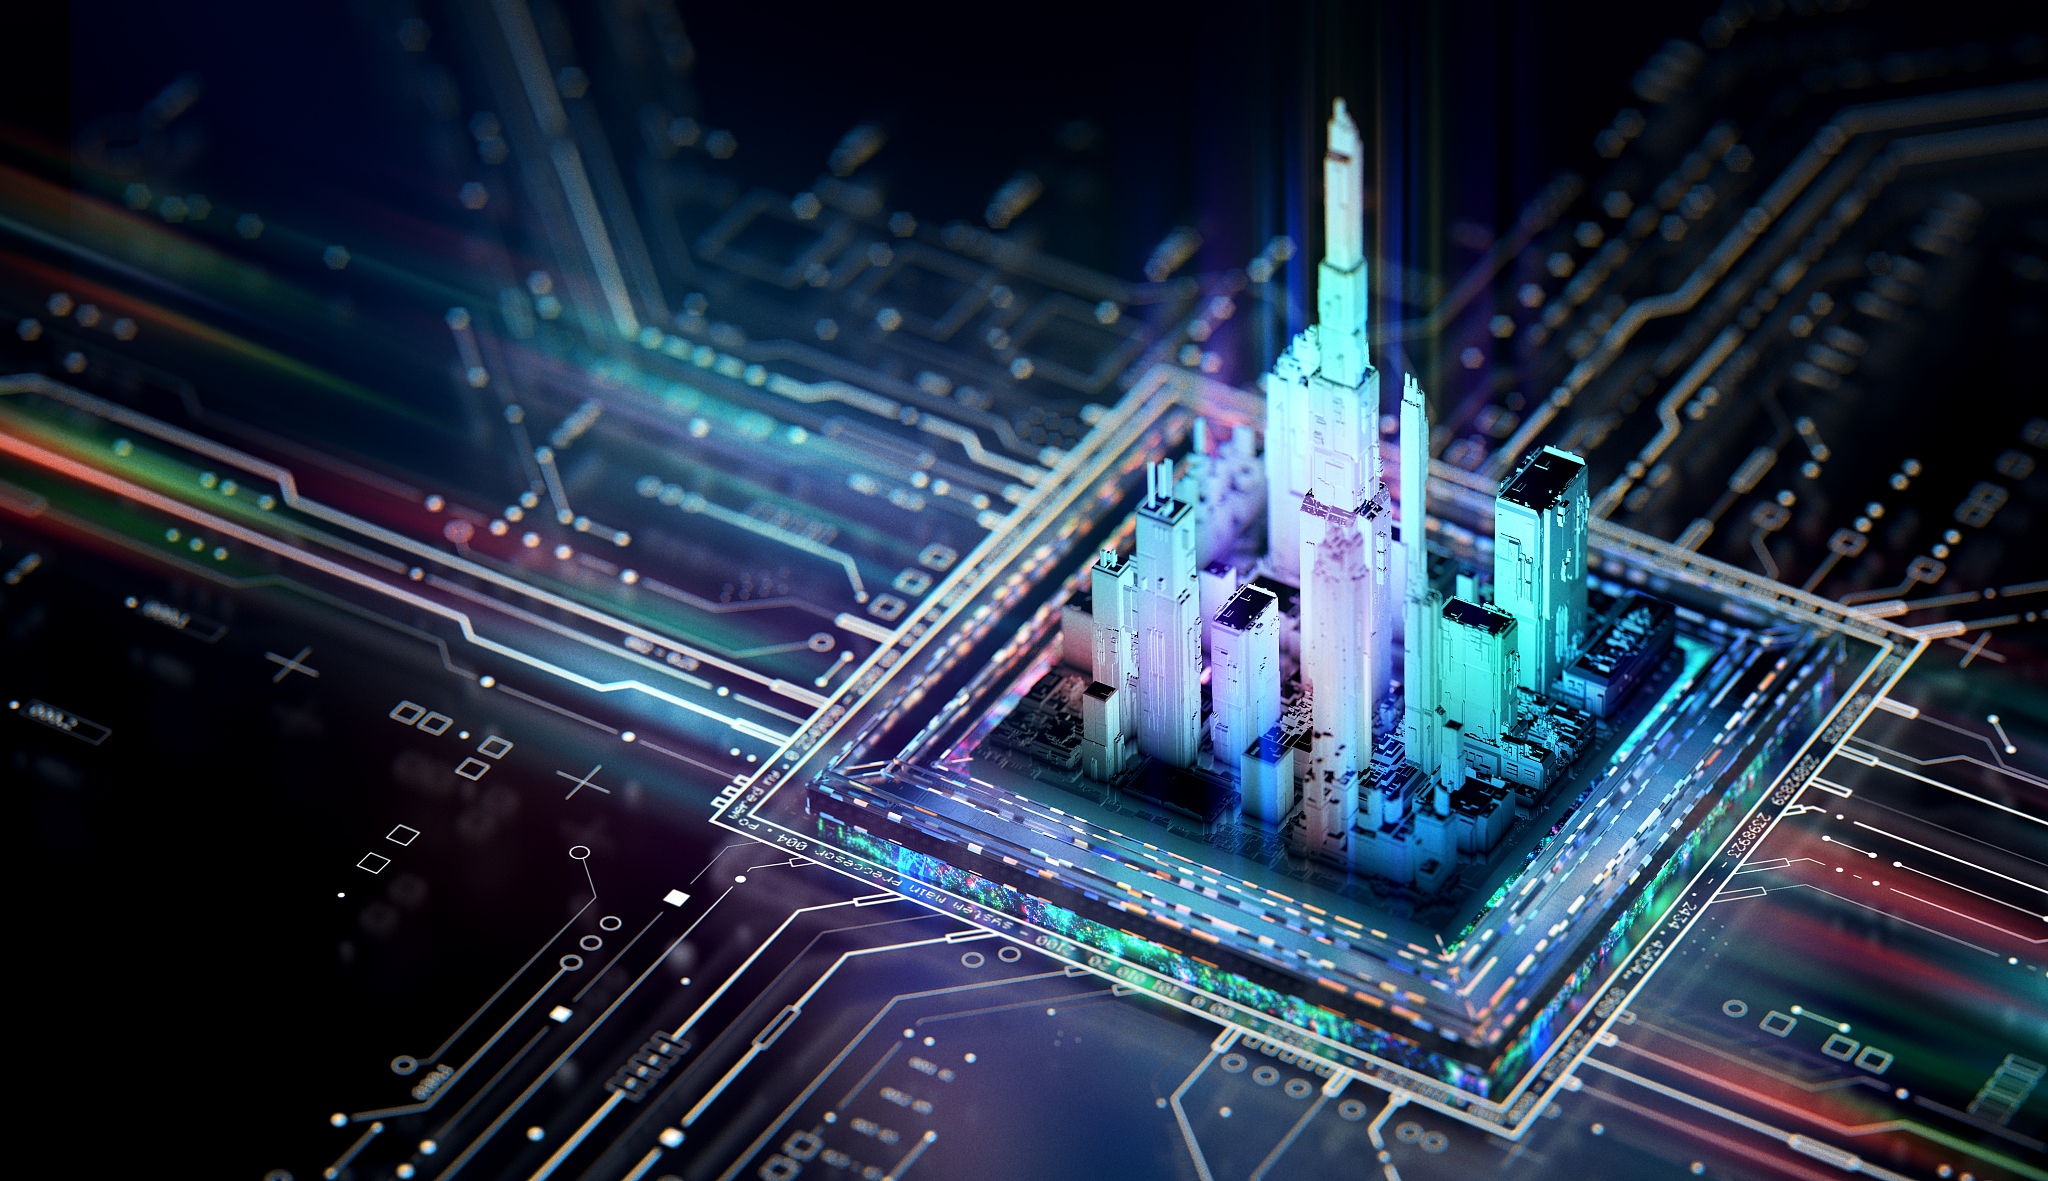 An illustration shows a future city integrated on a digital chip of computer. /CFP